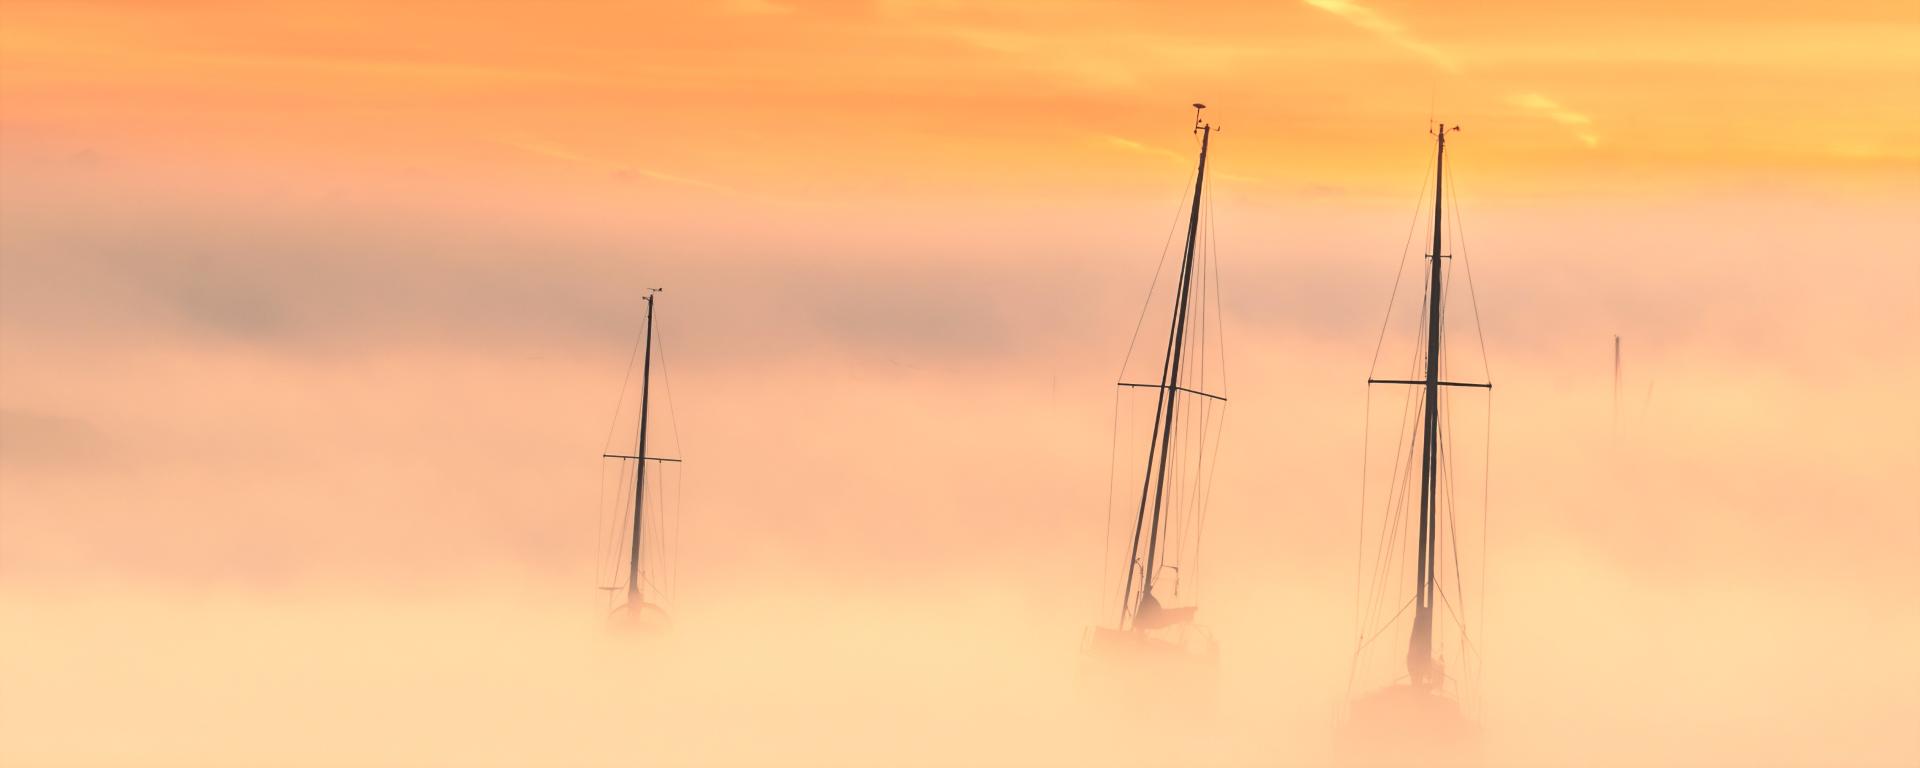 Masts in the Mist by James Crisp